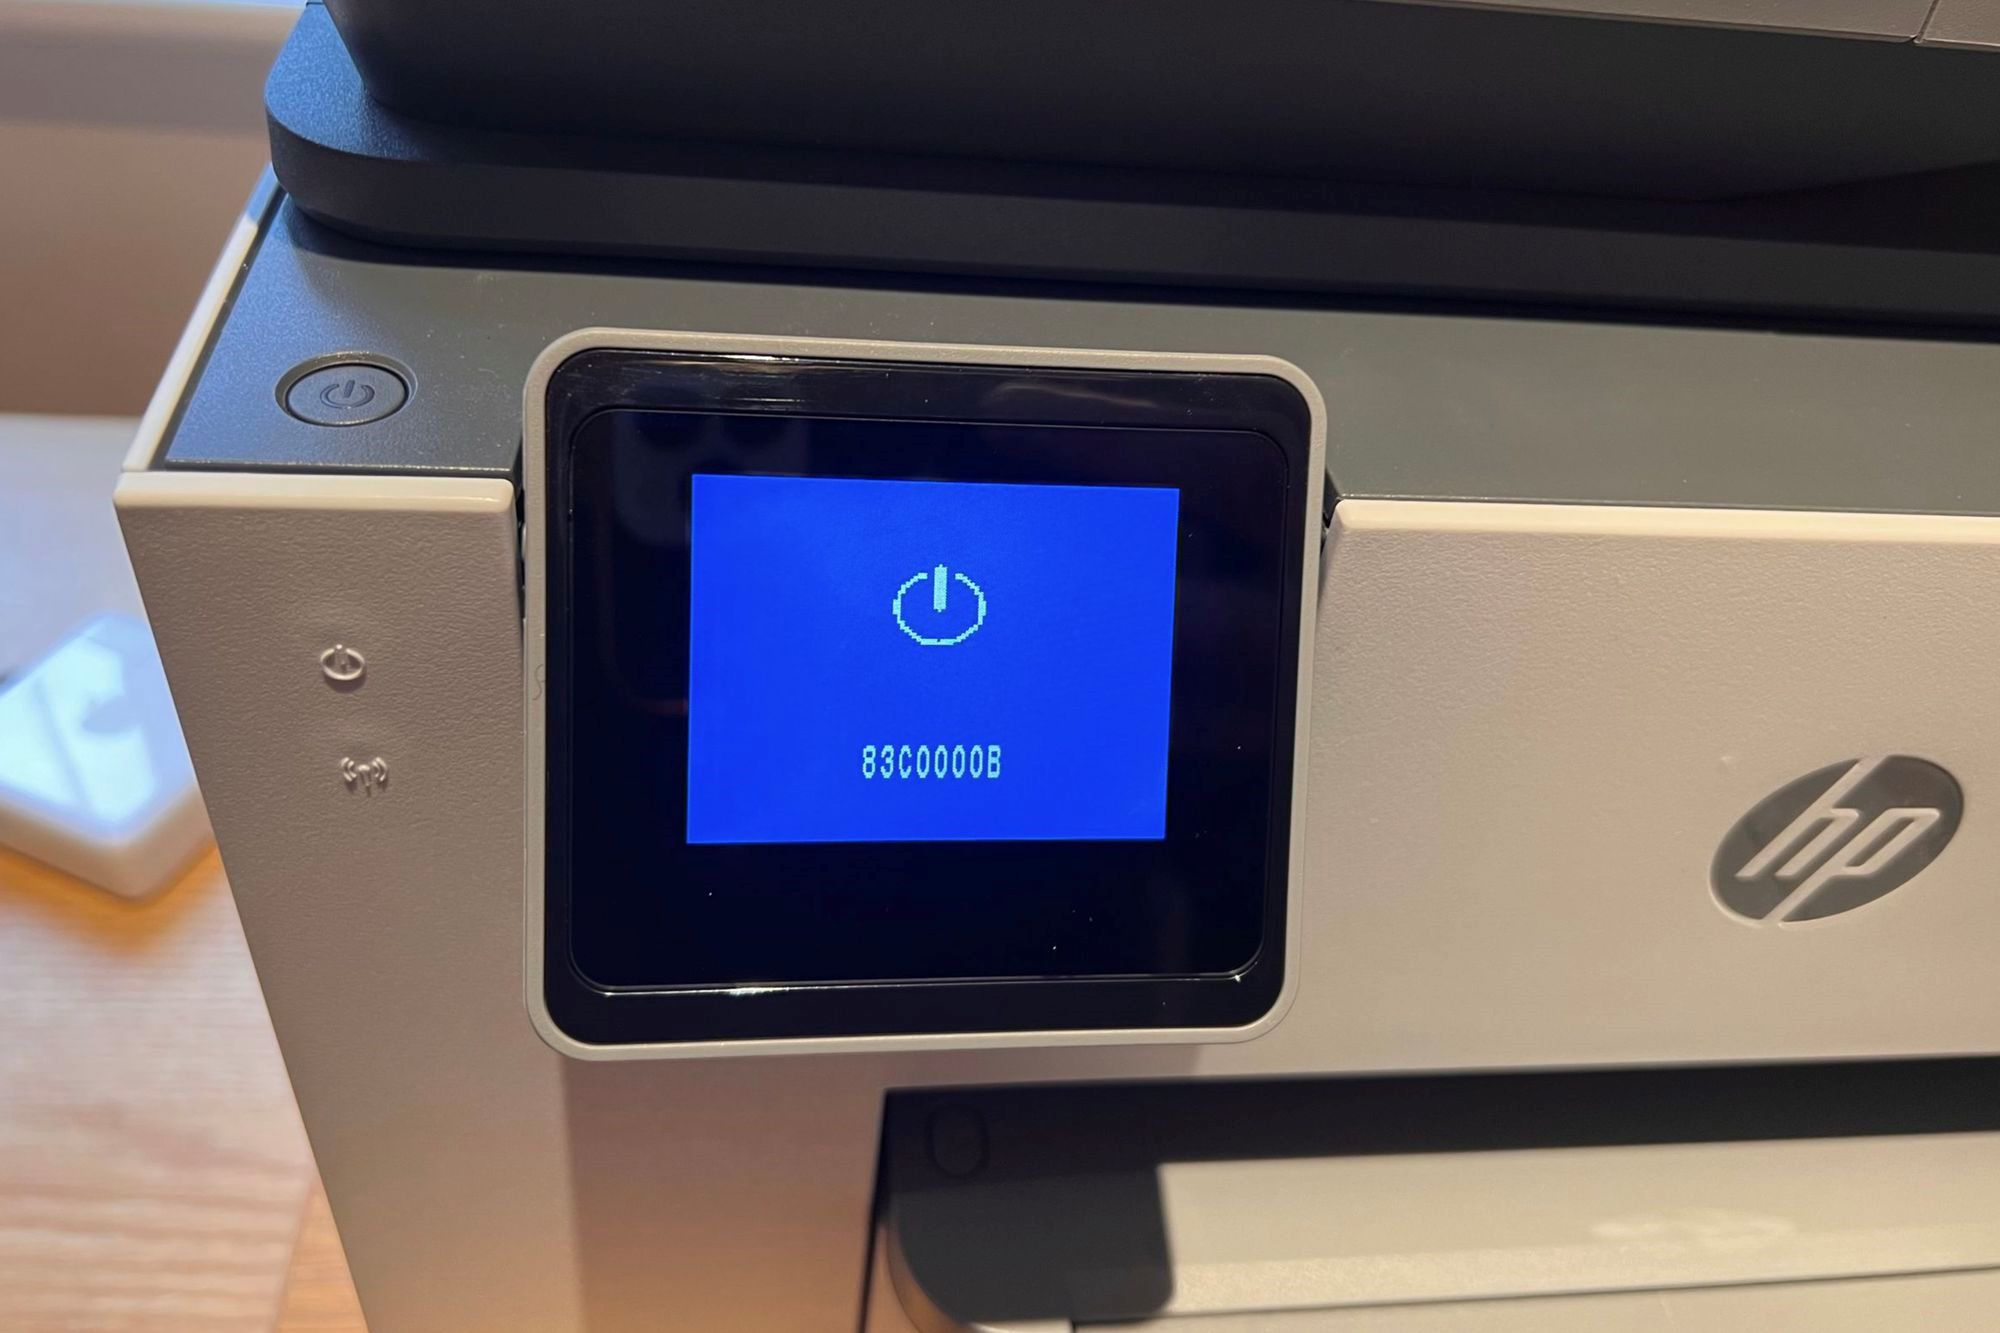 How Do I Connect My HP Printer To My Phone